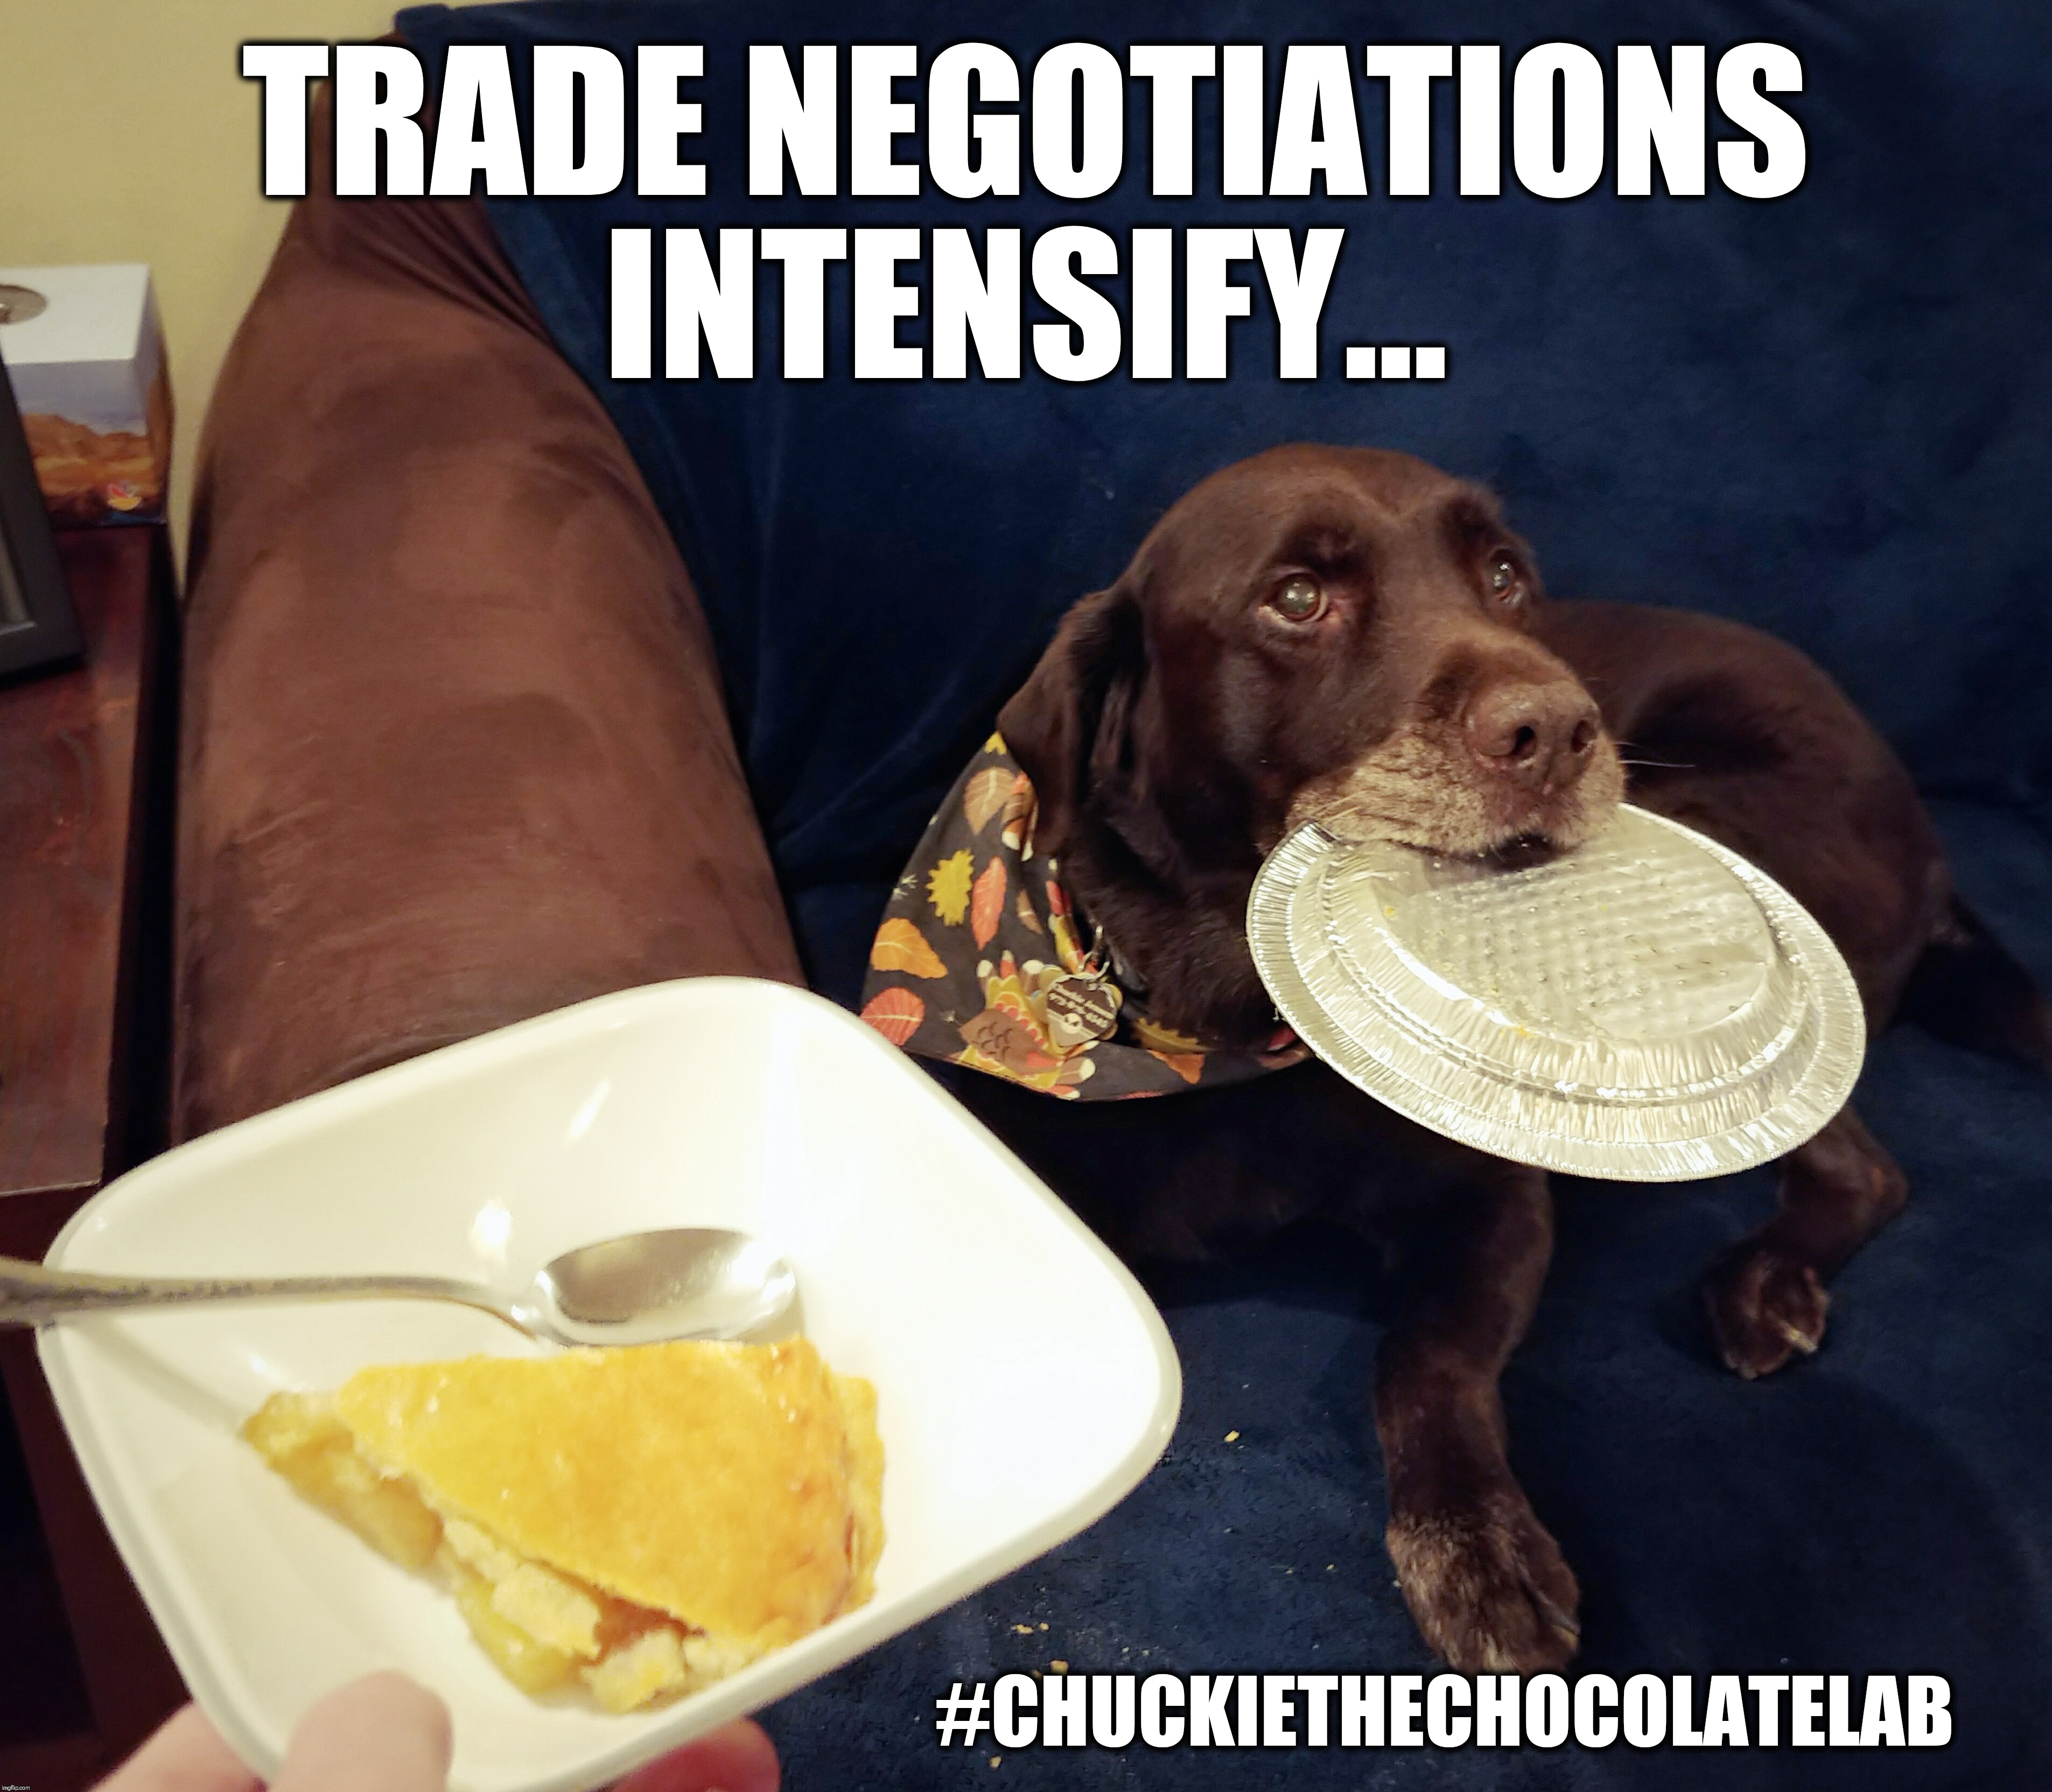 Apple Pie Negotiations | TRADE NEGOTIATIONS INTENSIFY... #CHUCKIETHECHOCOLATELAB | image tagged in chuckie the chocolate lab,dogs,memes,funny,apple pie,negotiations | made w/ Imgflip meme maker